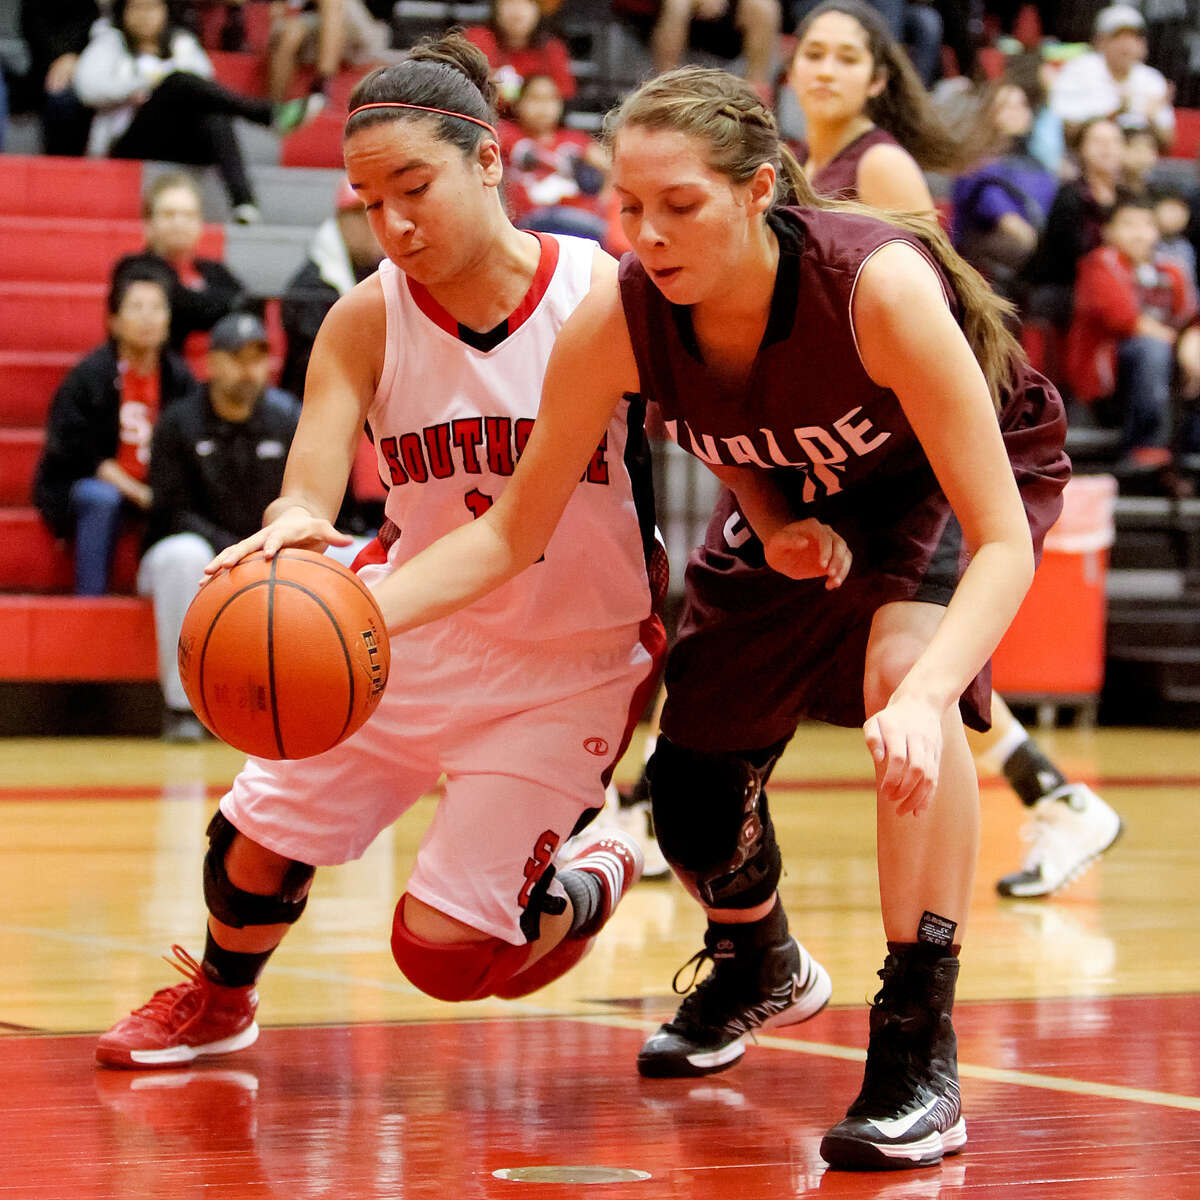 Southside's Sabrina Guzman, left, fights for the ball with Uvalde's Brittany Sendejo during the first quarter of their game at Southside High School on Saturday. The Lady Cardinals beat Uvalde 62-44, which, along with a Harlandale loss, moved Southside into third place in district play.